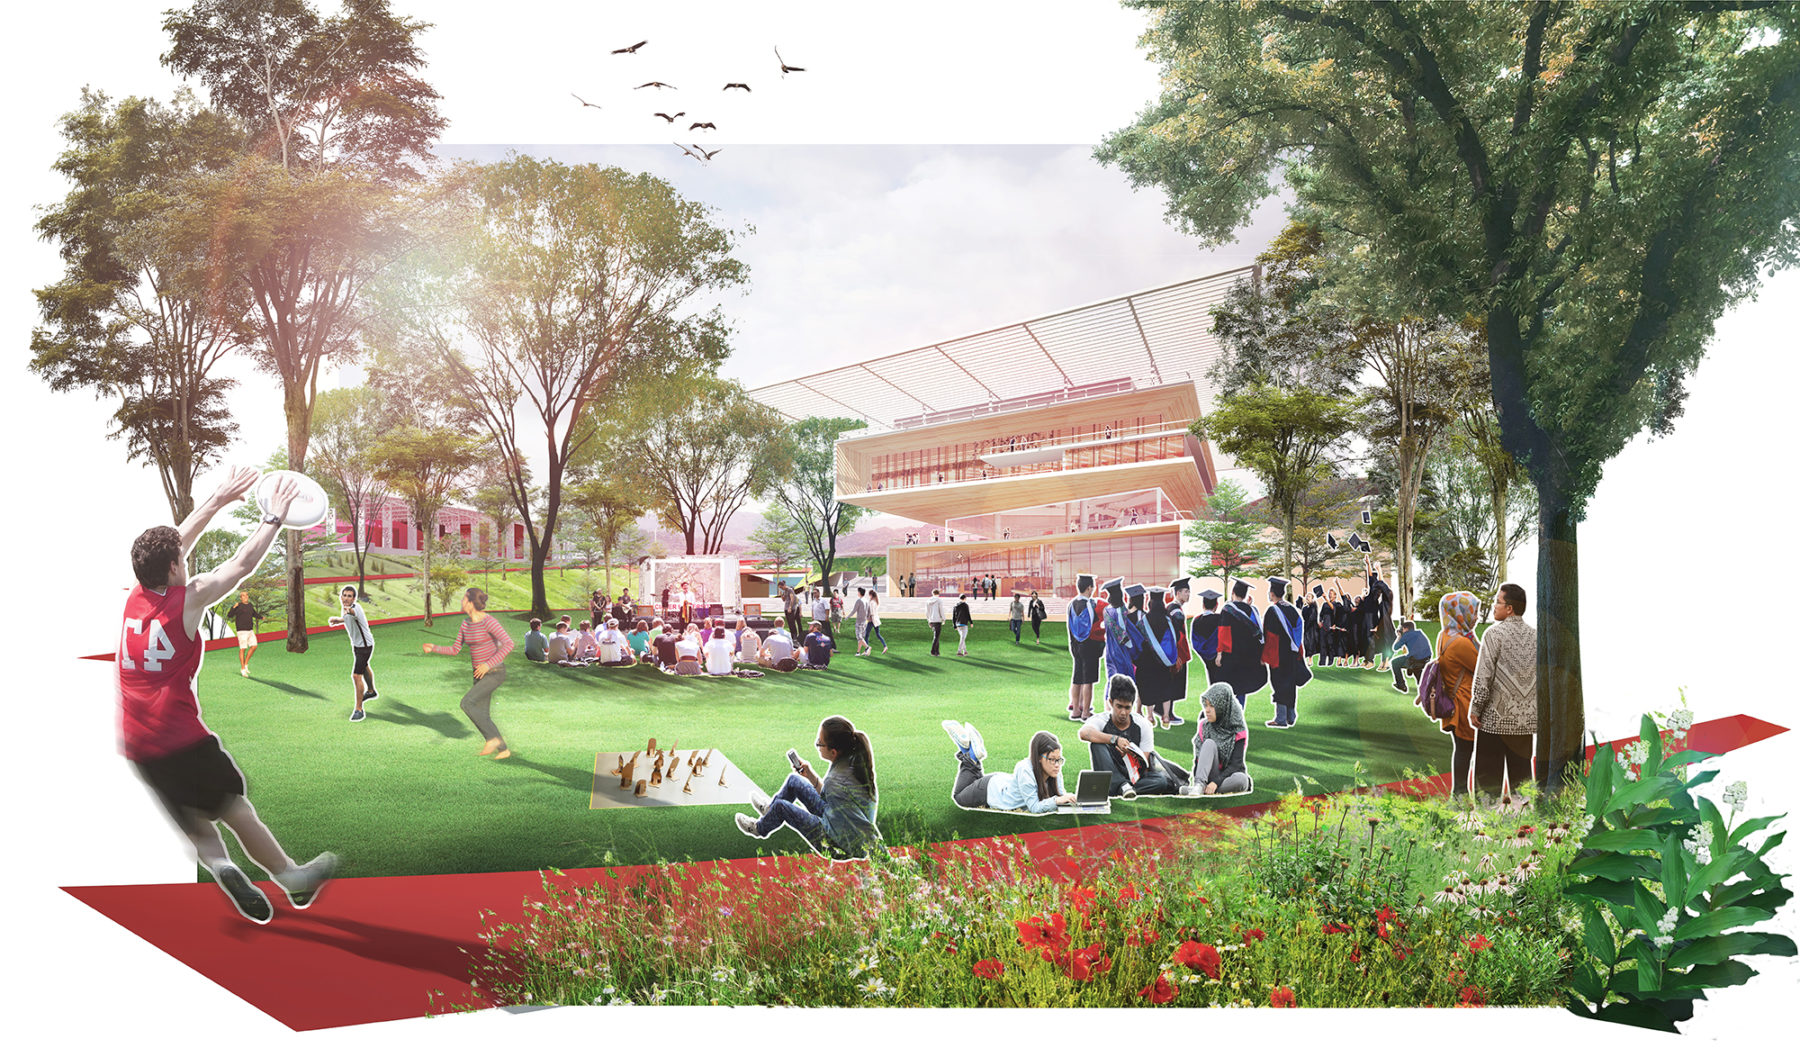 Render of people enjoying various activities on the campus green space